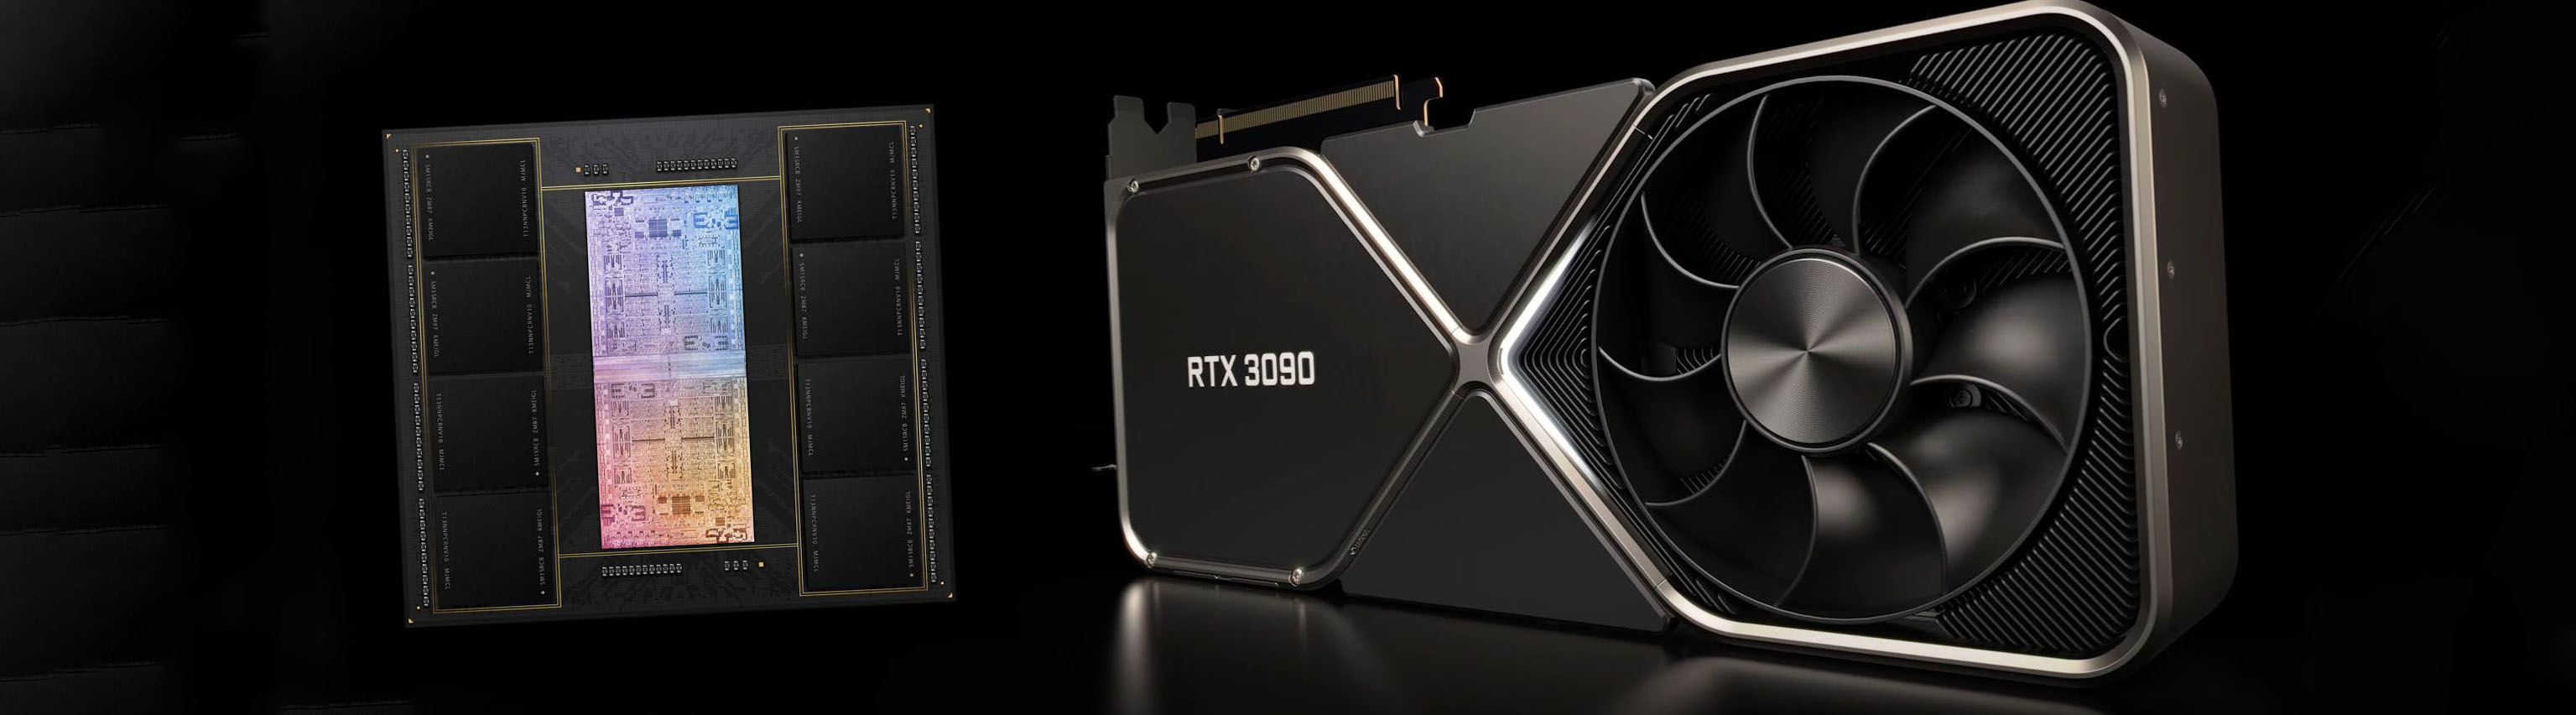 Despite Apple's claims, M1 Ultra GPU is not as powerful as RTX 3090 -  VideoCardz.com